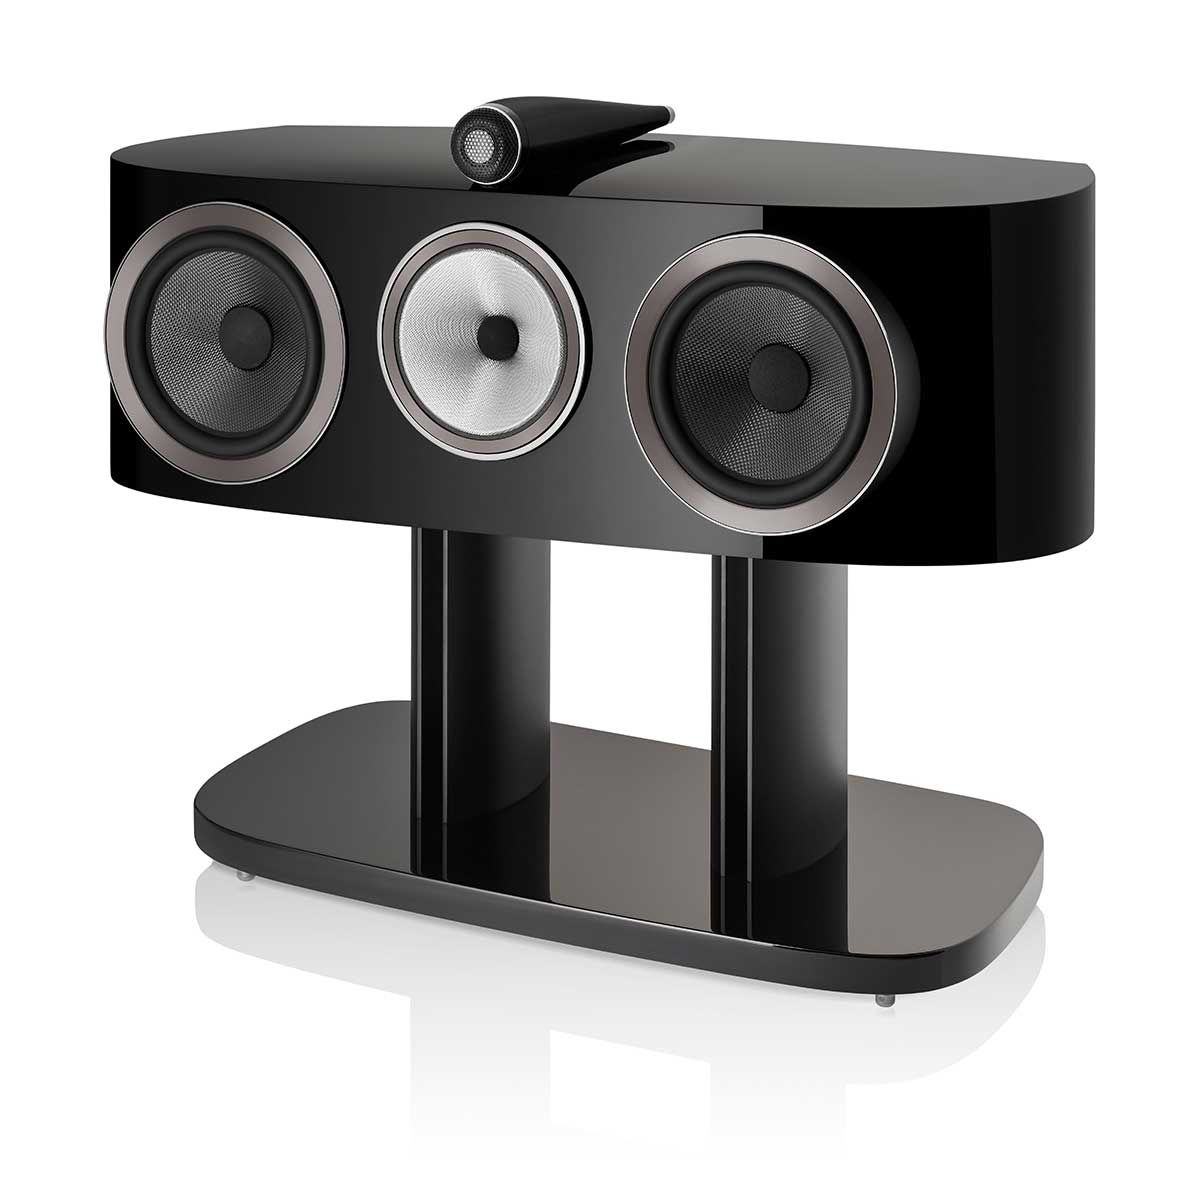 Bowers & Wilkins HTM81 D4 Center Channel Speaker, Gloss Black, front angle without grille on stand